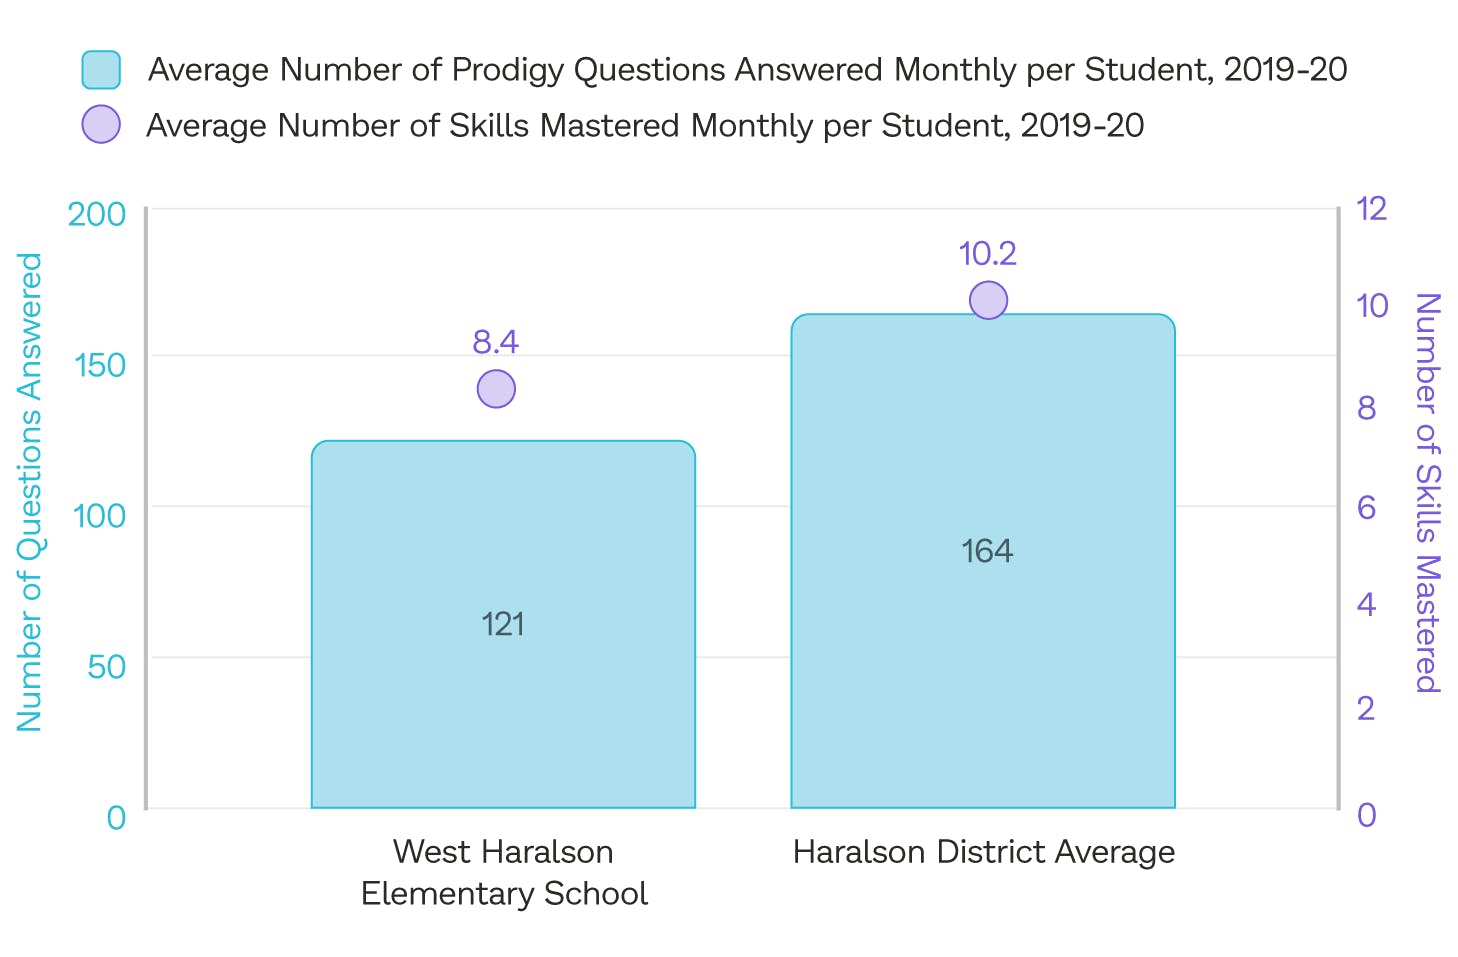 The average number of questions answered and math skills mastered by students in Haralson County School District who play Prodigy, compared to West Haralson Elementary in the 2019 to 2020 school year.